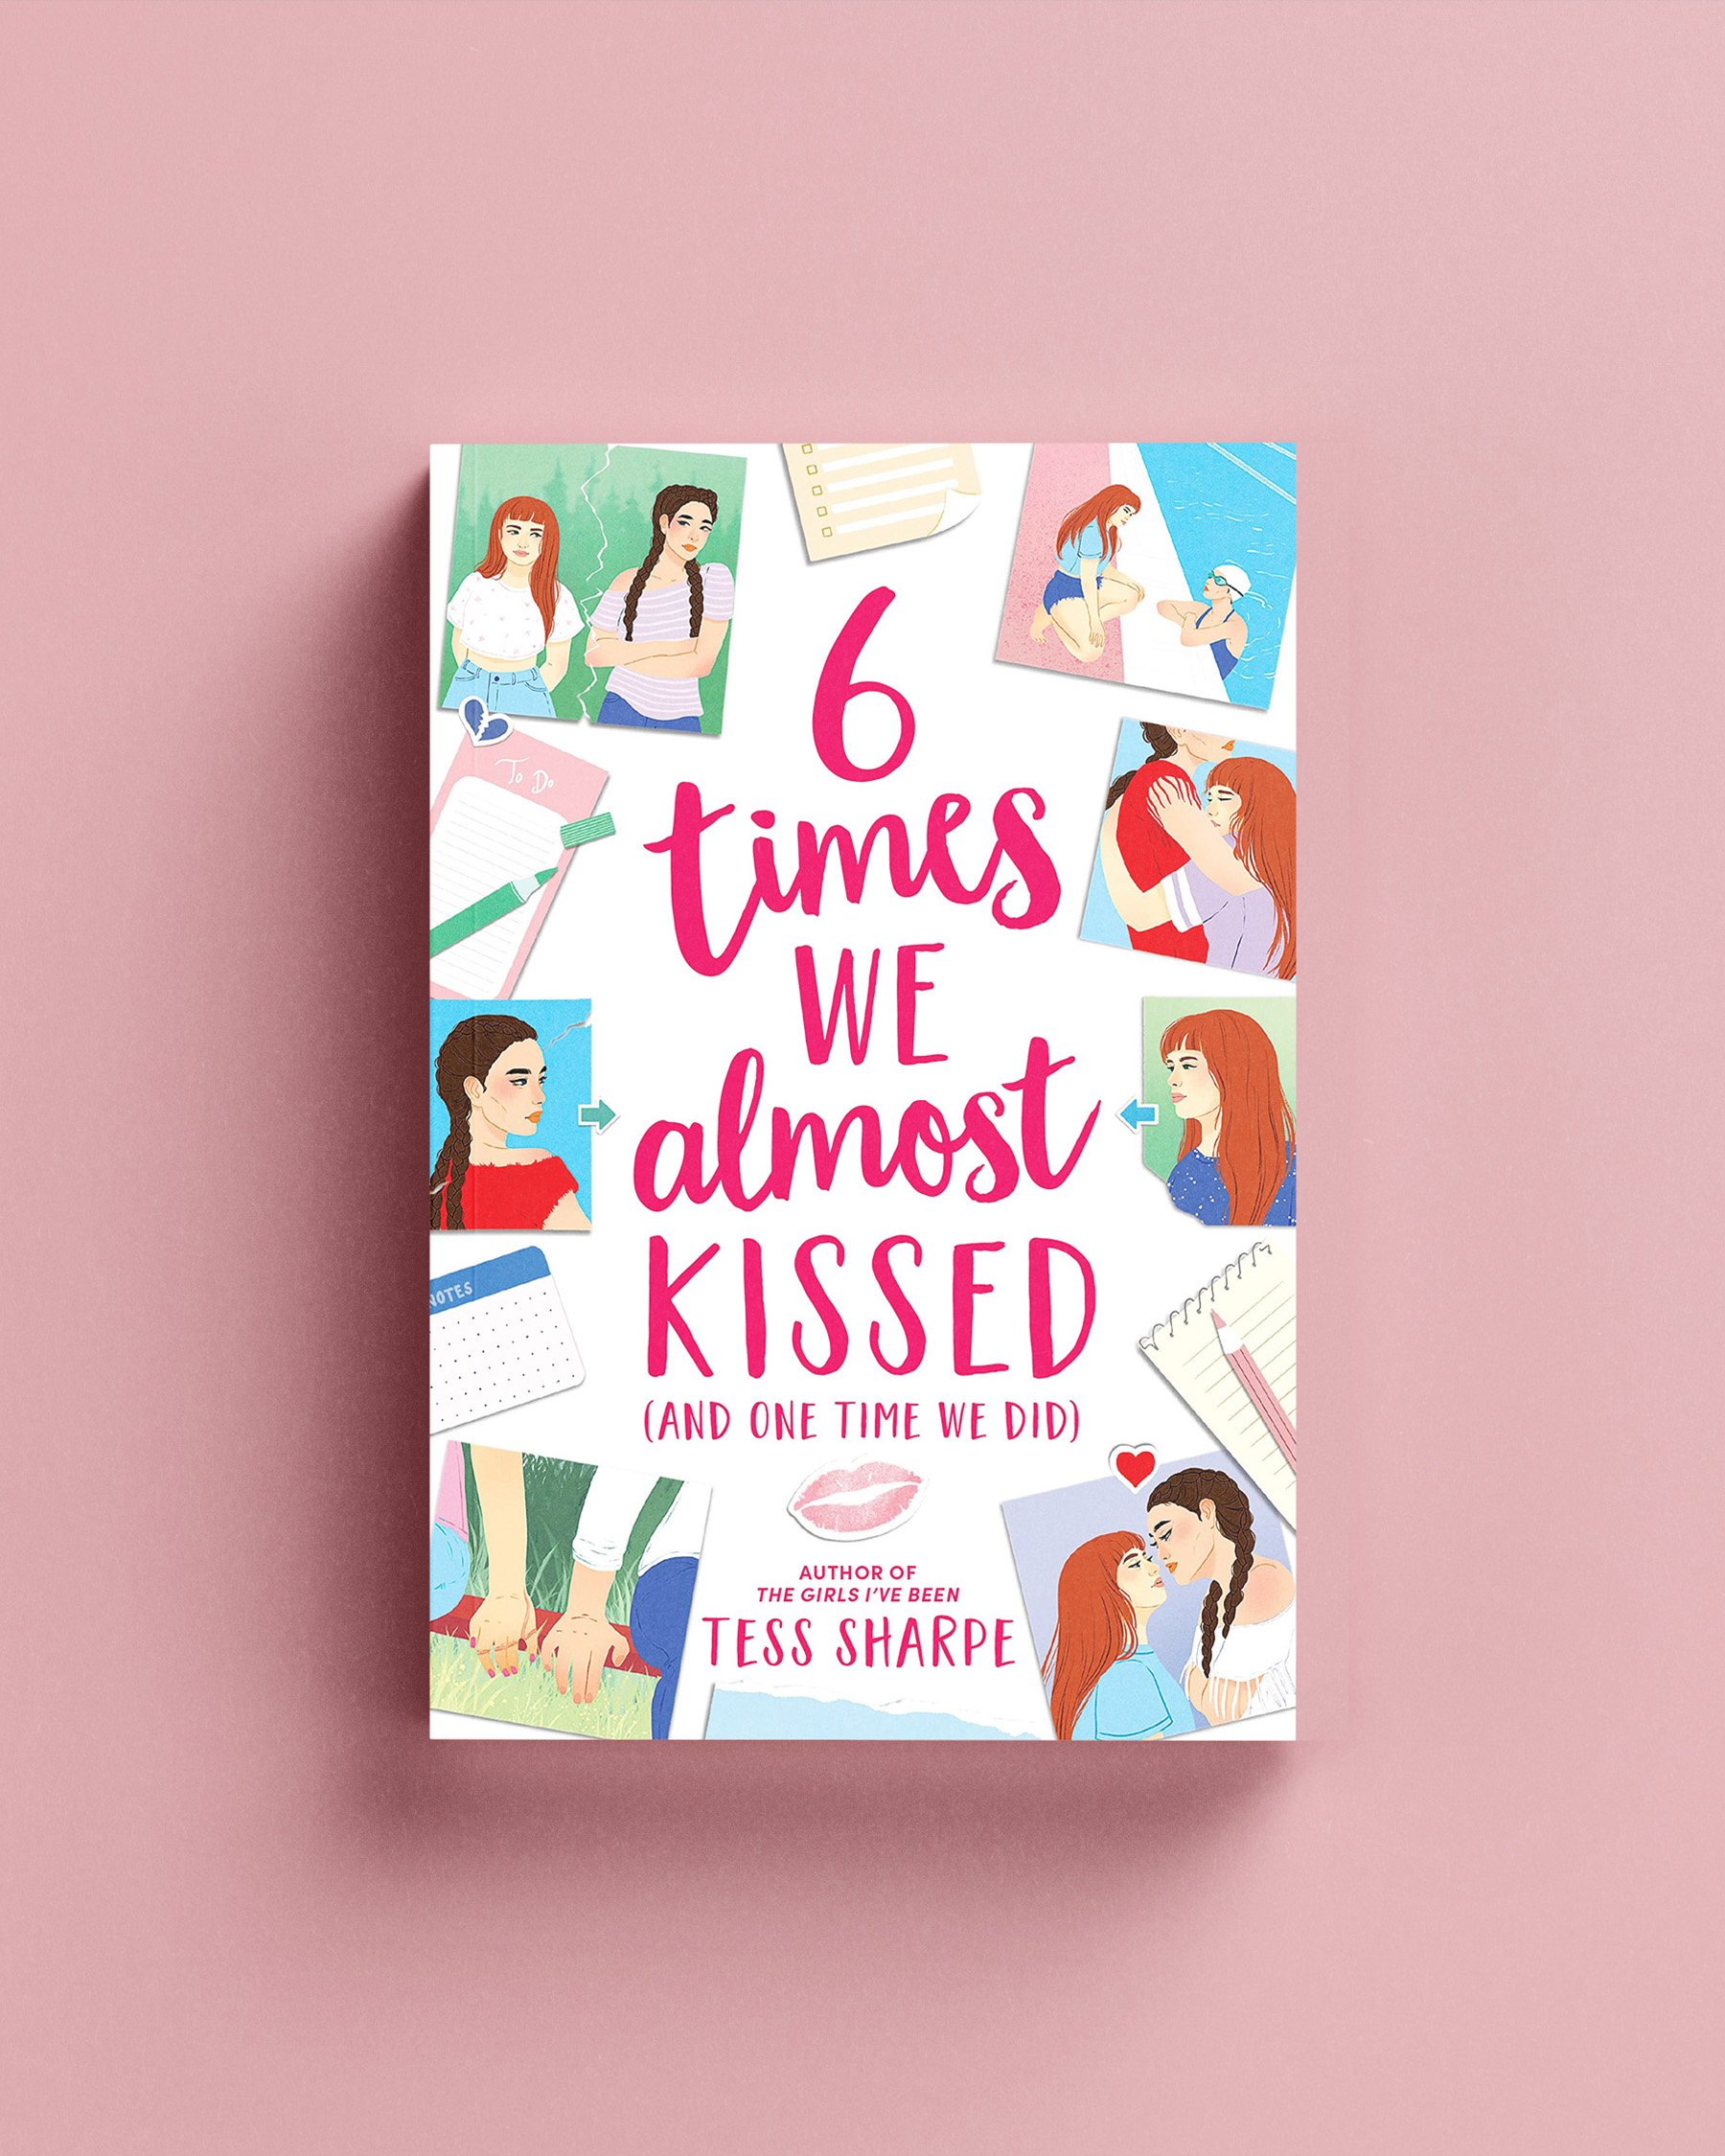 Cover for "6 times we almost kissed" by Tess Sharpe